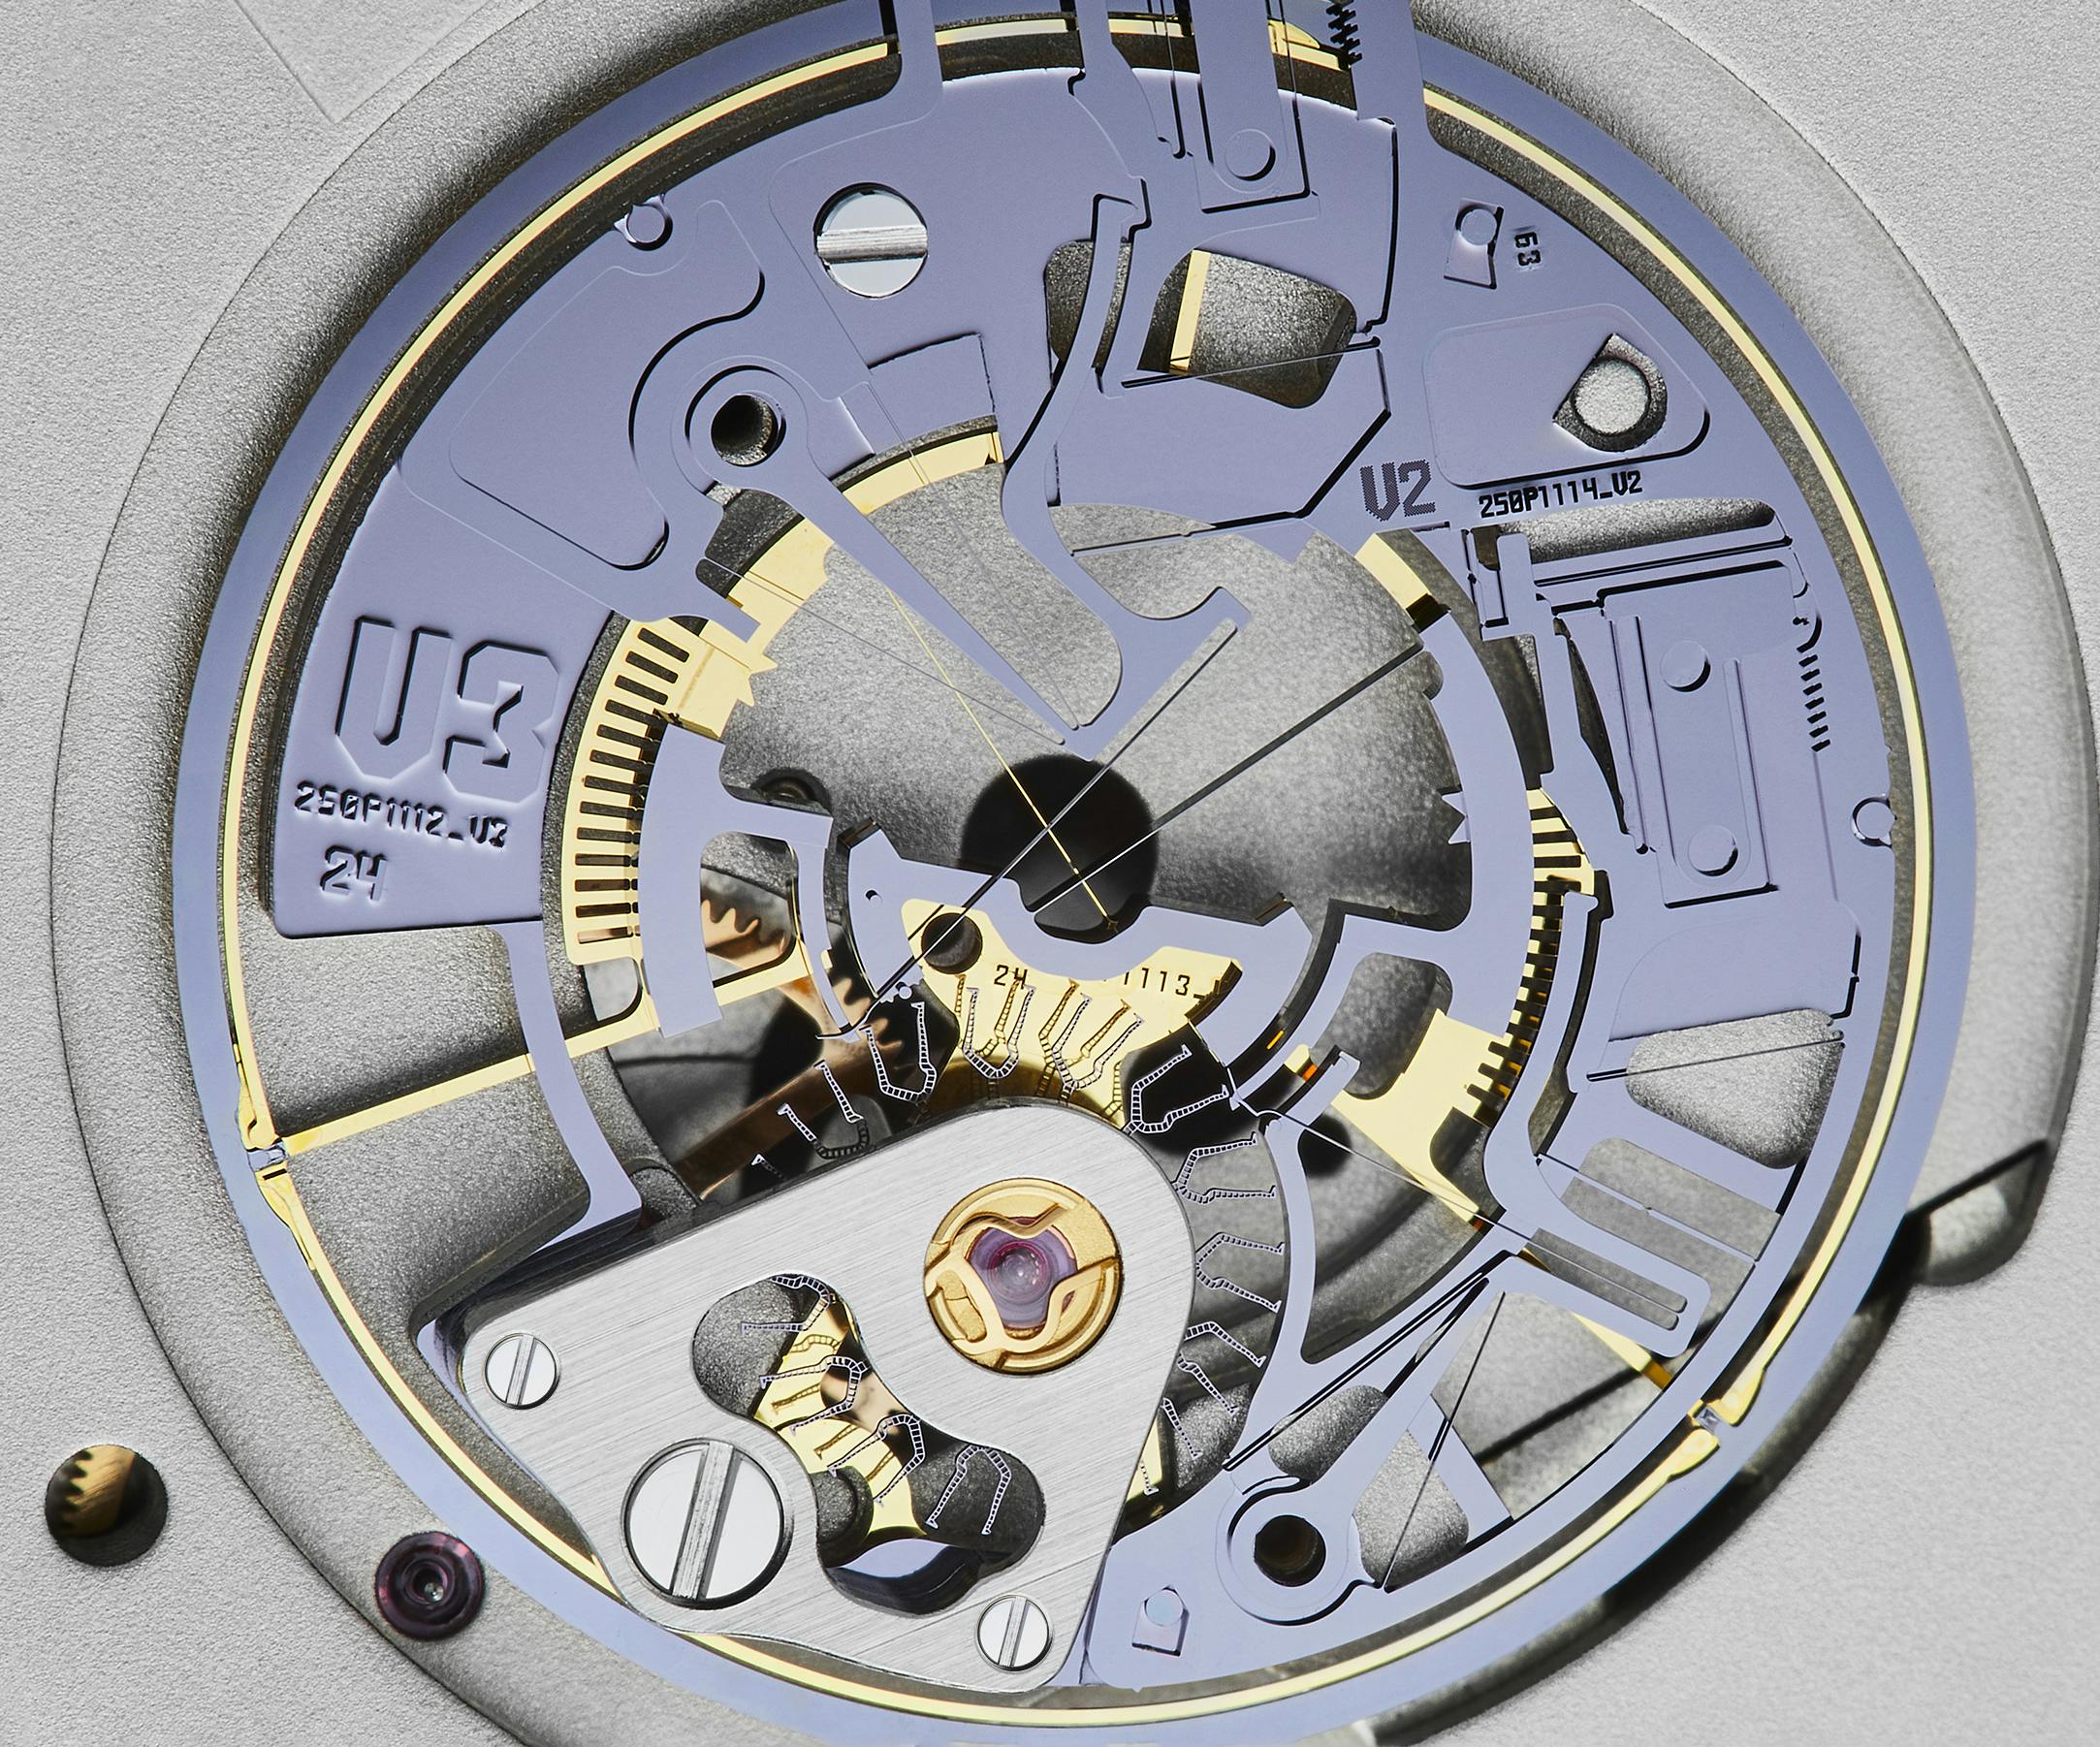 Mechanical watch, flexure-based escapement with high-power reserve